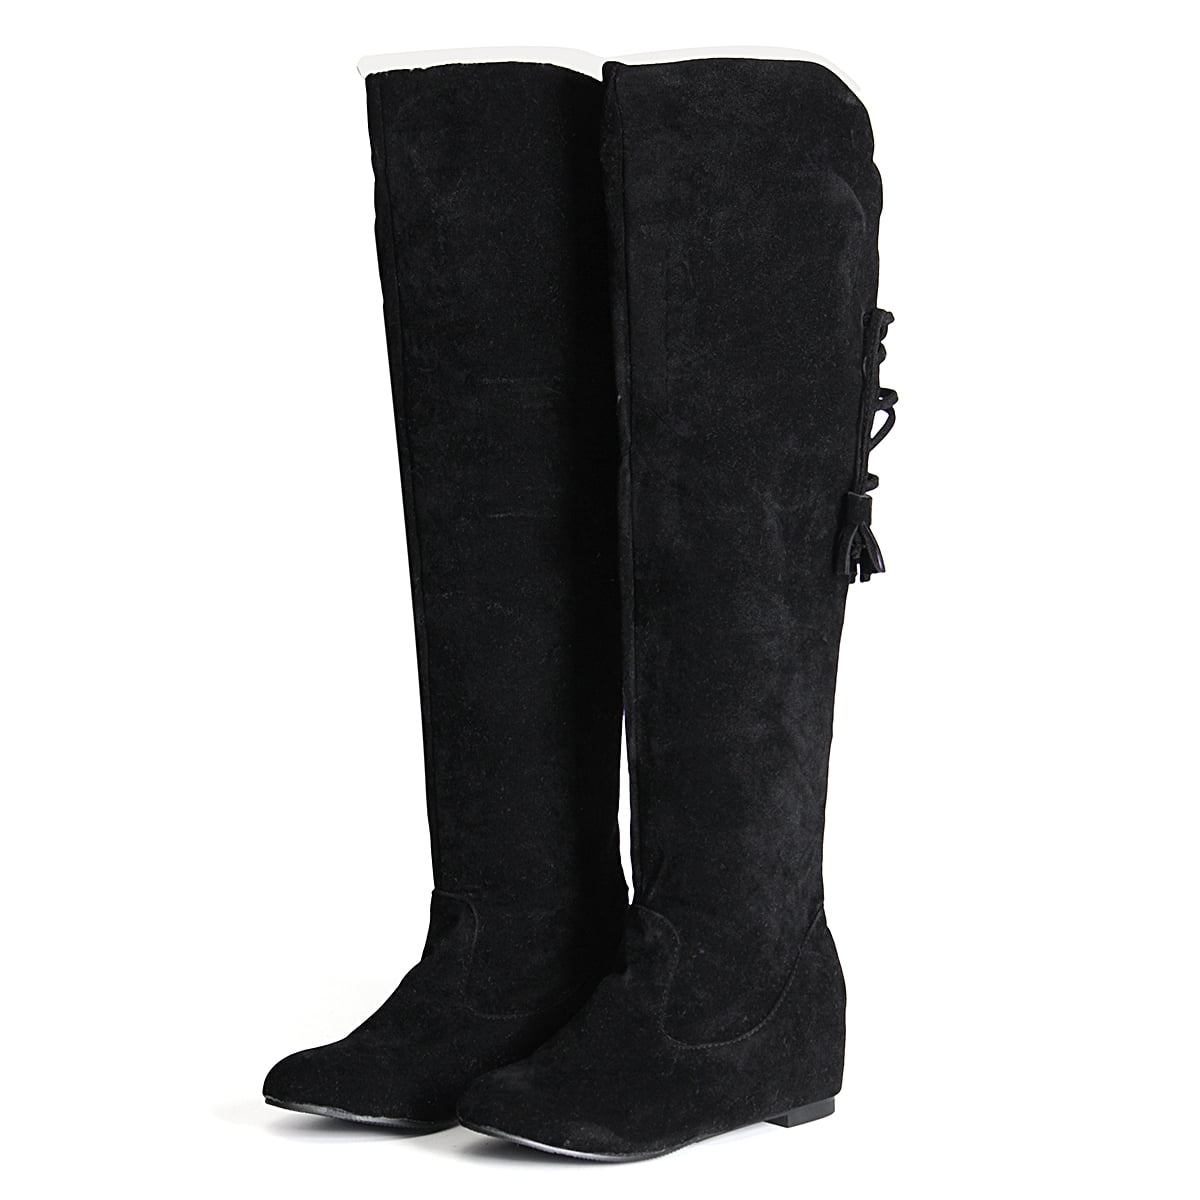 unbrand - Winter Women Casual Heel Shoes Warm Over the Knee Thigh High ...